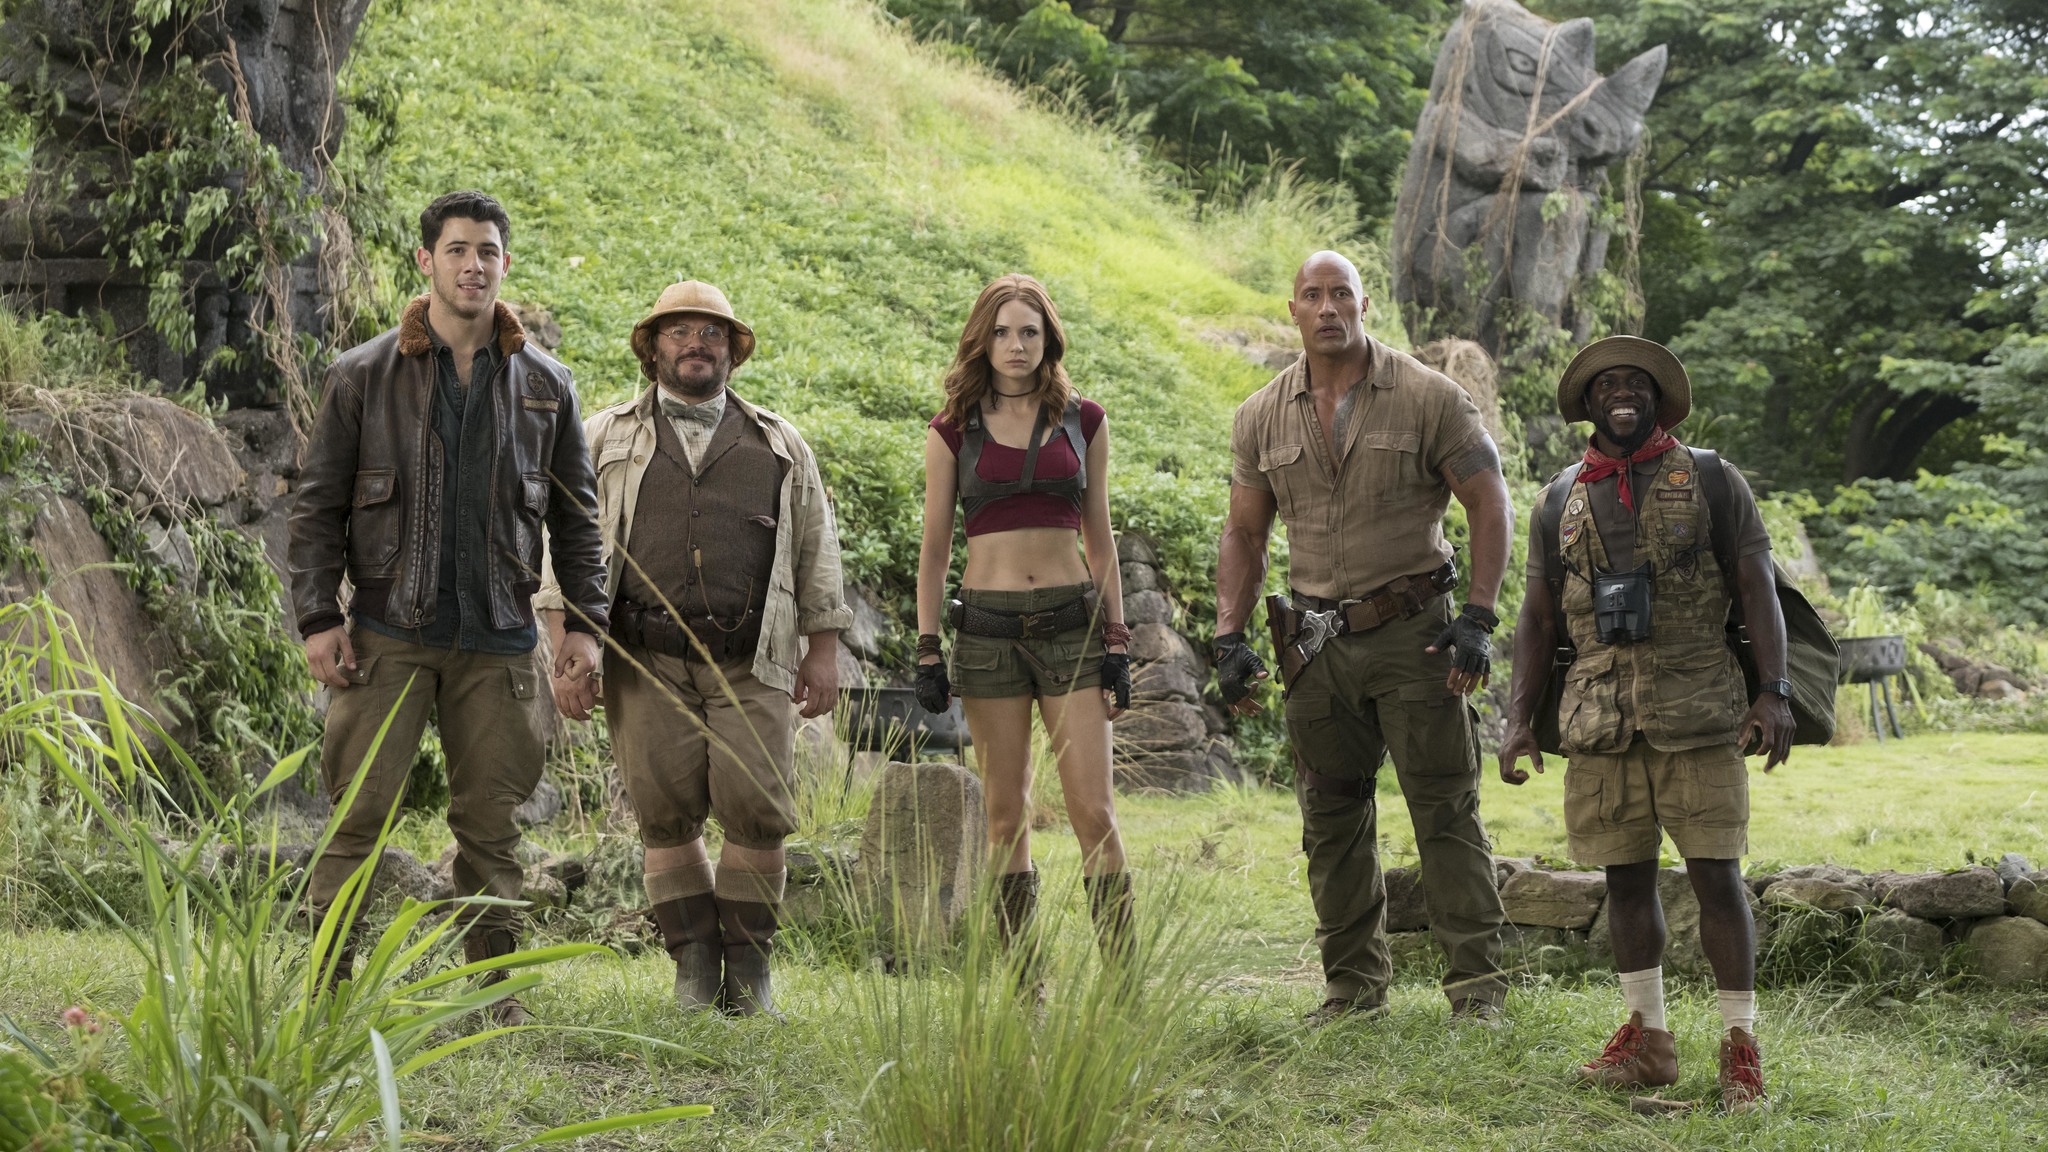 HD wallpaper of Jumanji: Welcome to the Jungle featuring the main cast posing in a jungle setting.